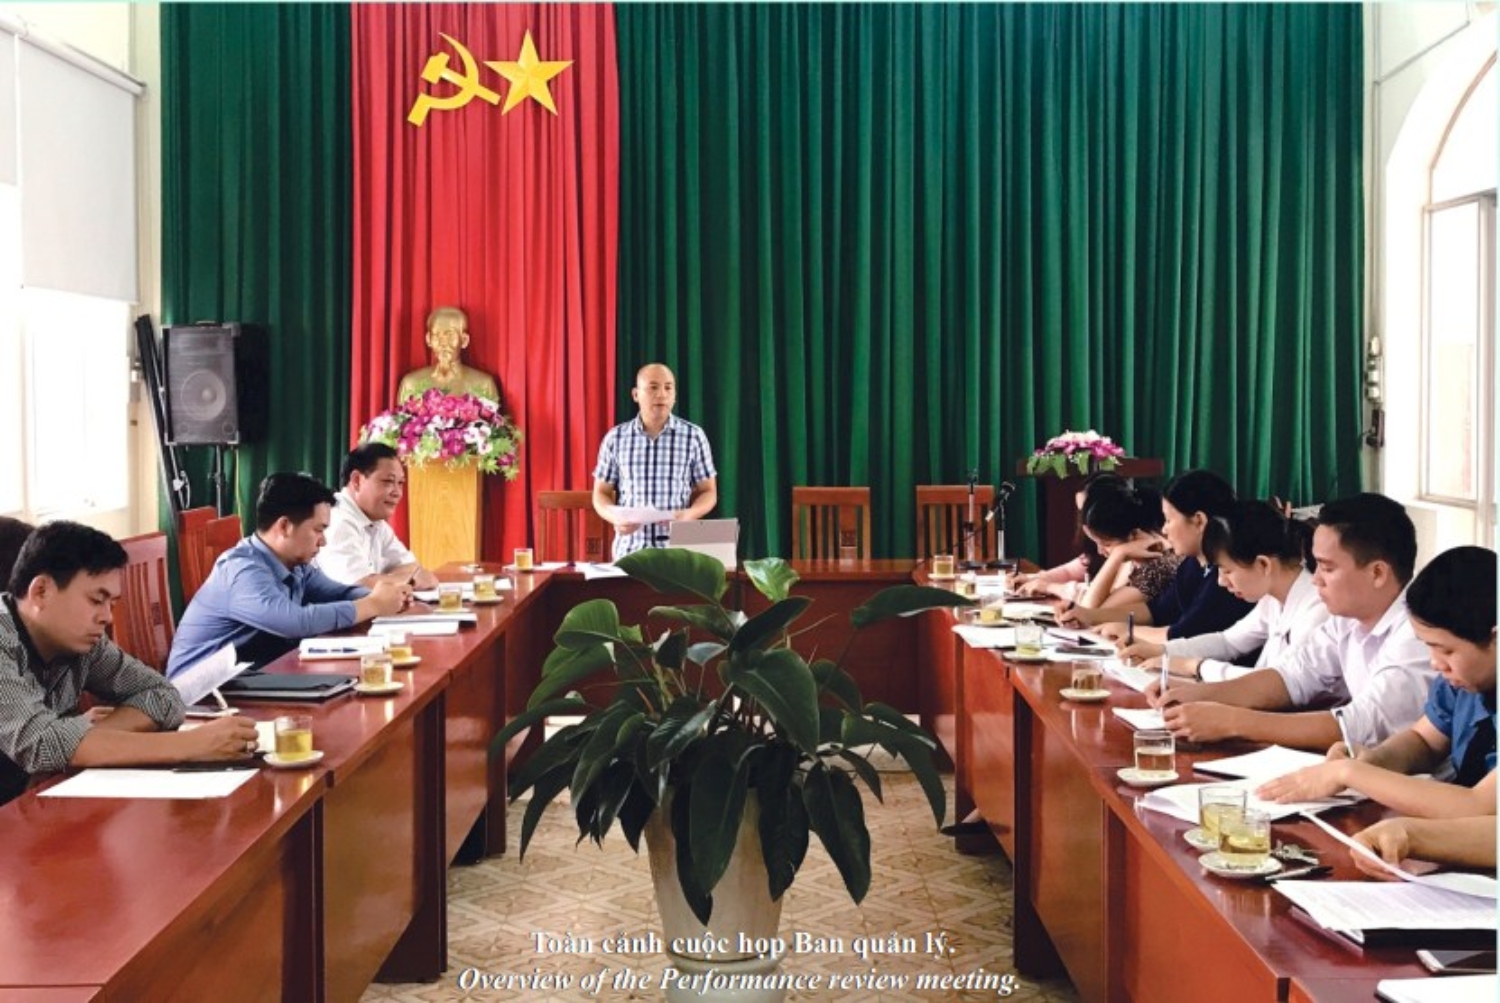 The Performance Review Meeting of Management board of Non nuoc Cao Bang geopark